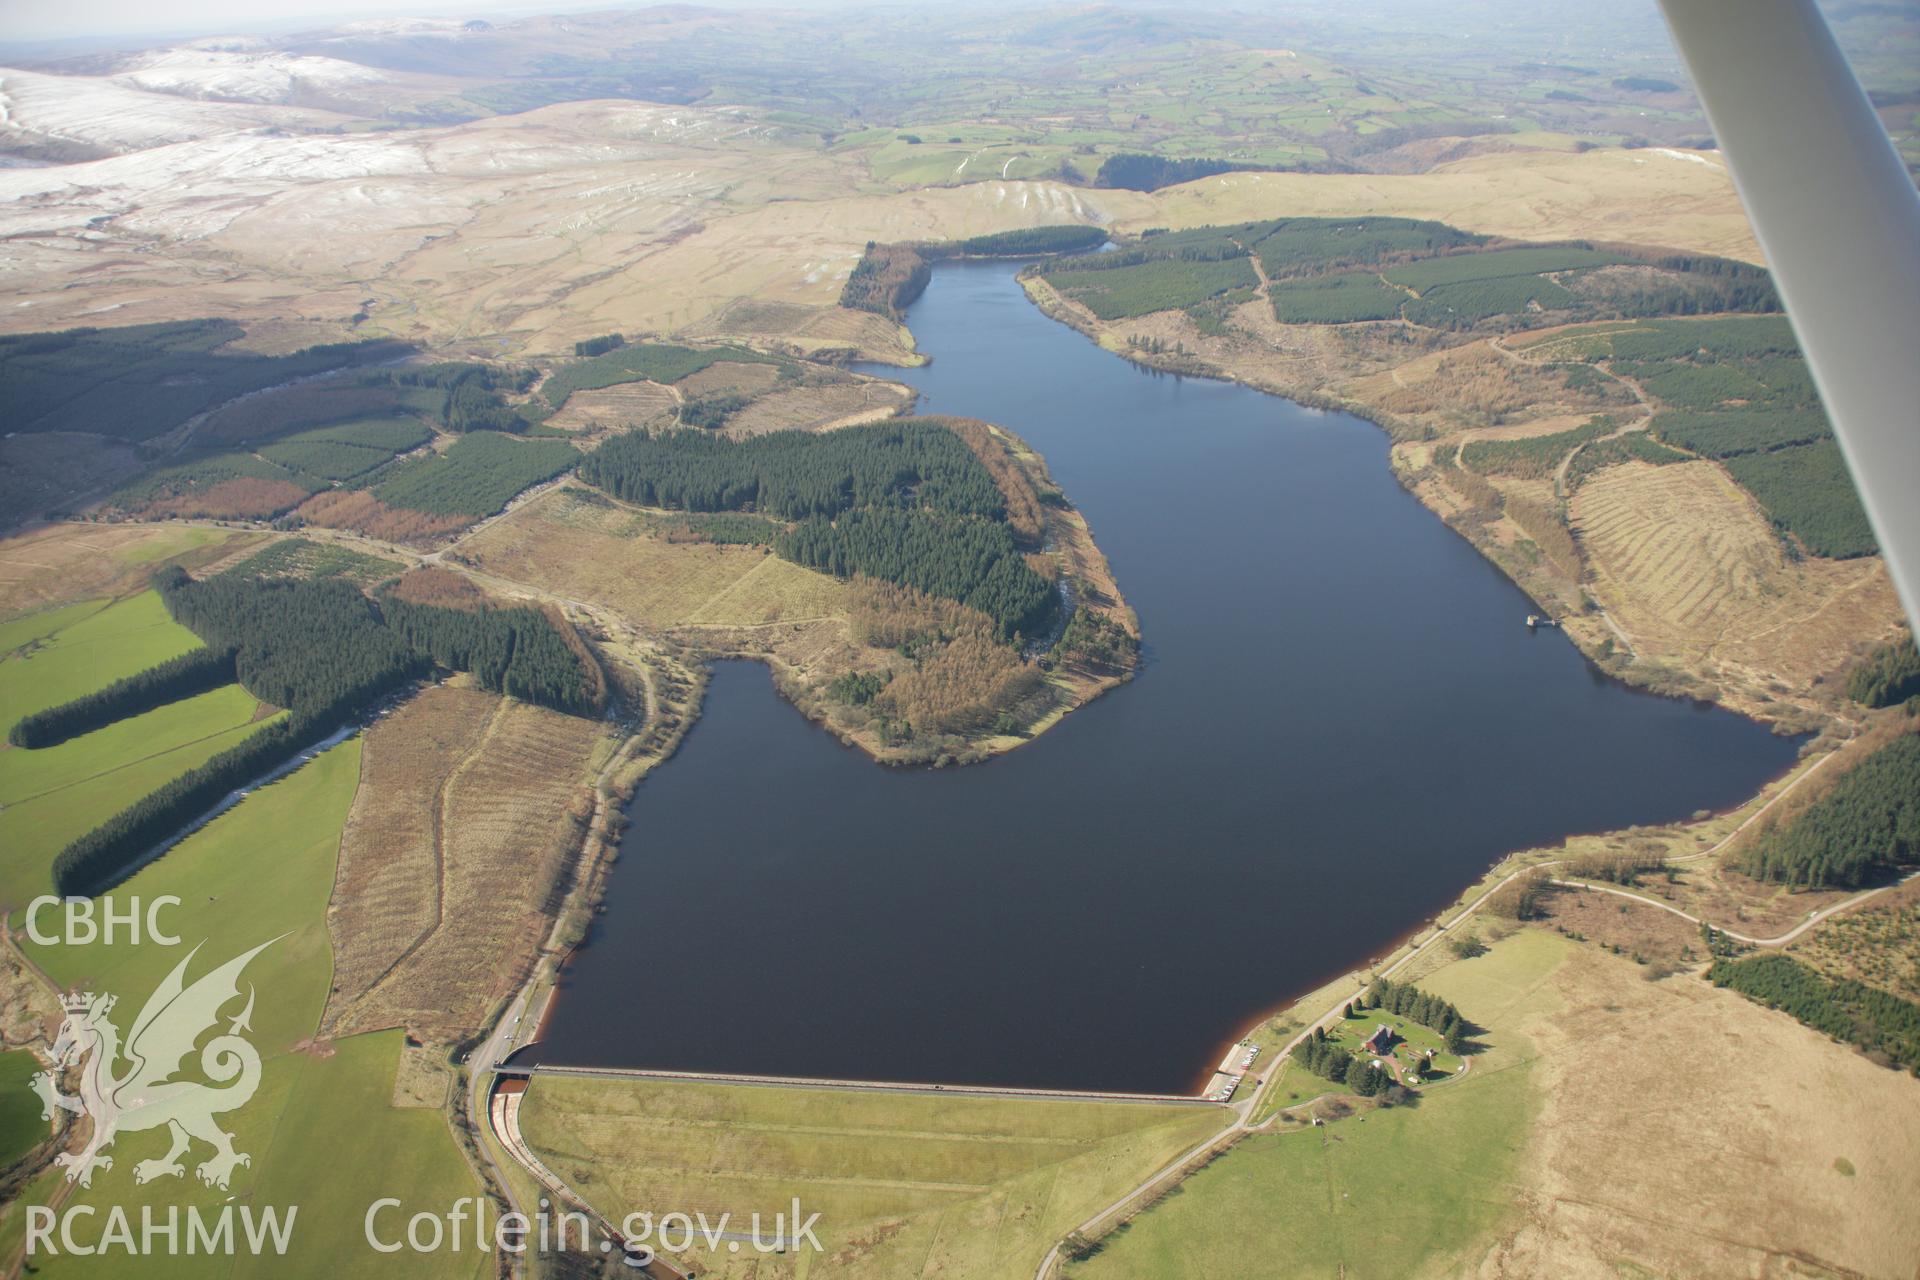 RCAHMW colour oblique aerial photograph of Usk Reservoir, viewed from the east. Taken on 21 March 2007 by Toby Driver